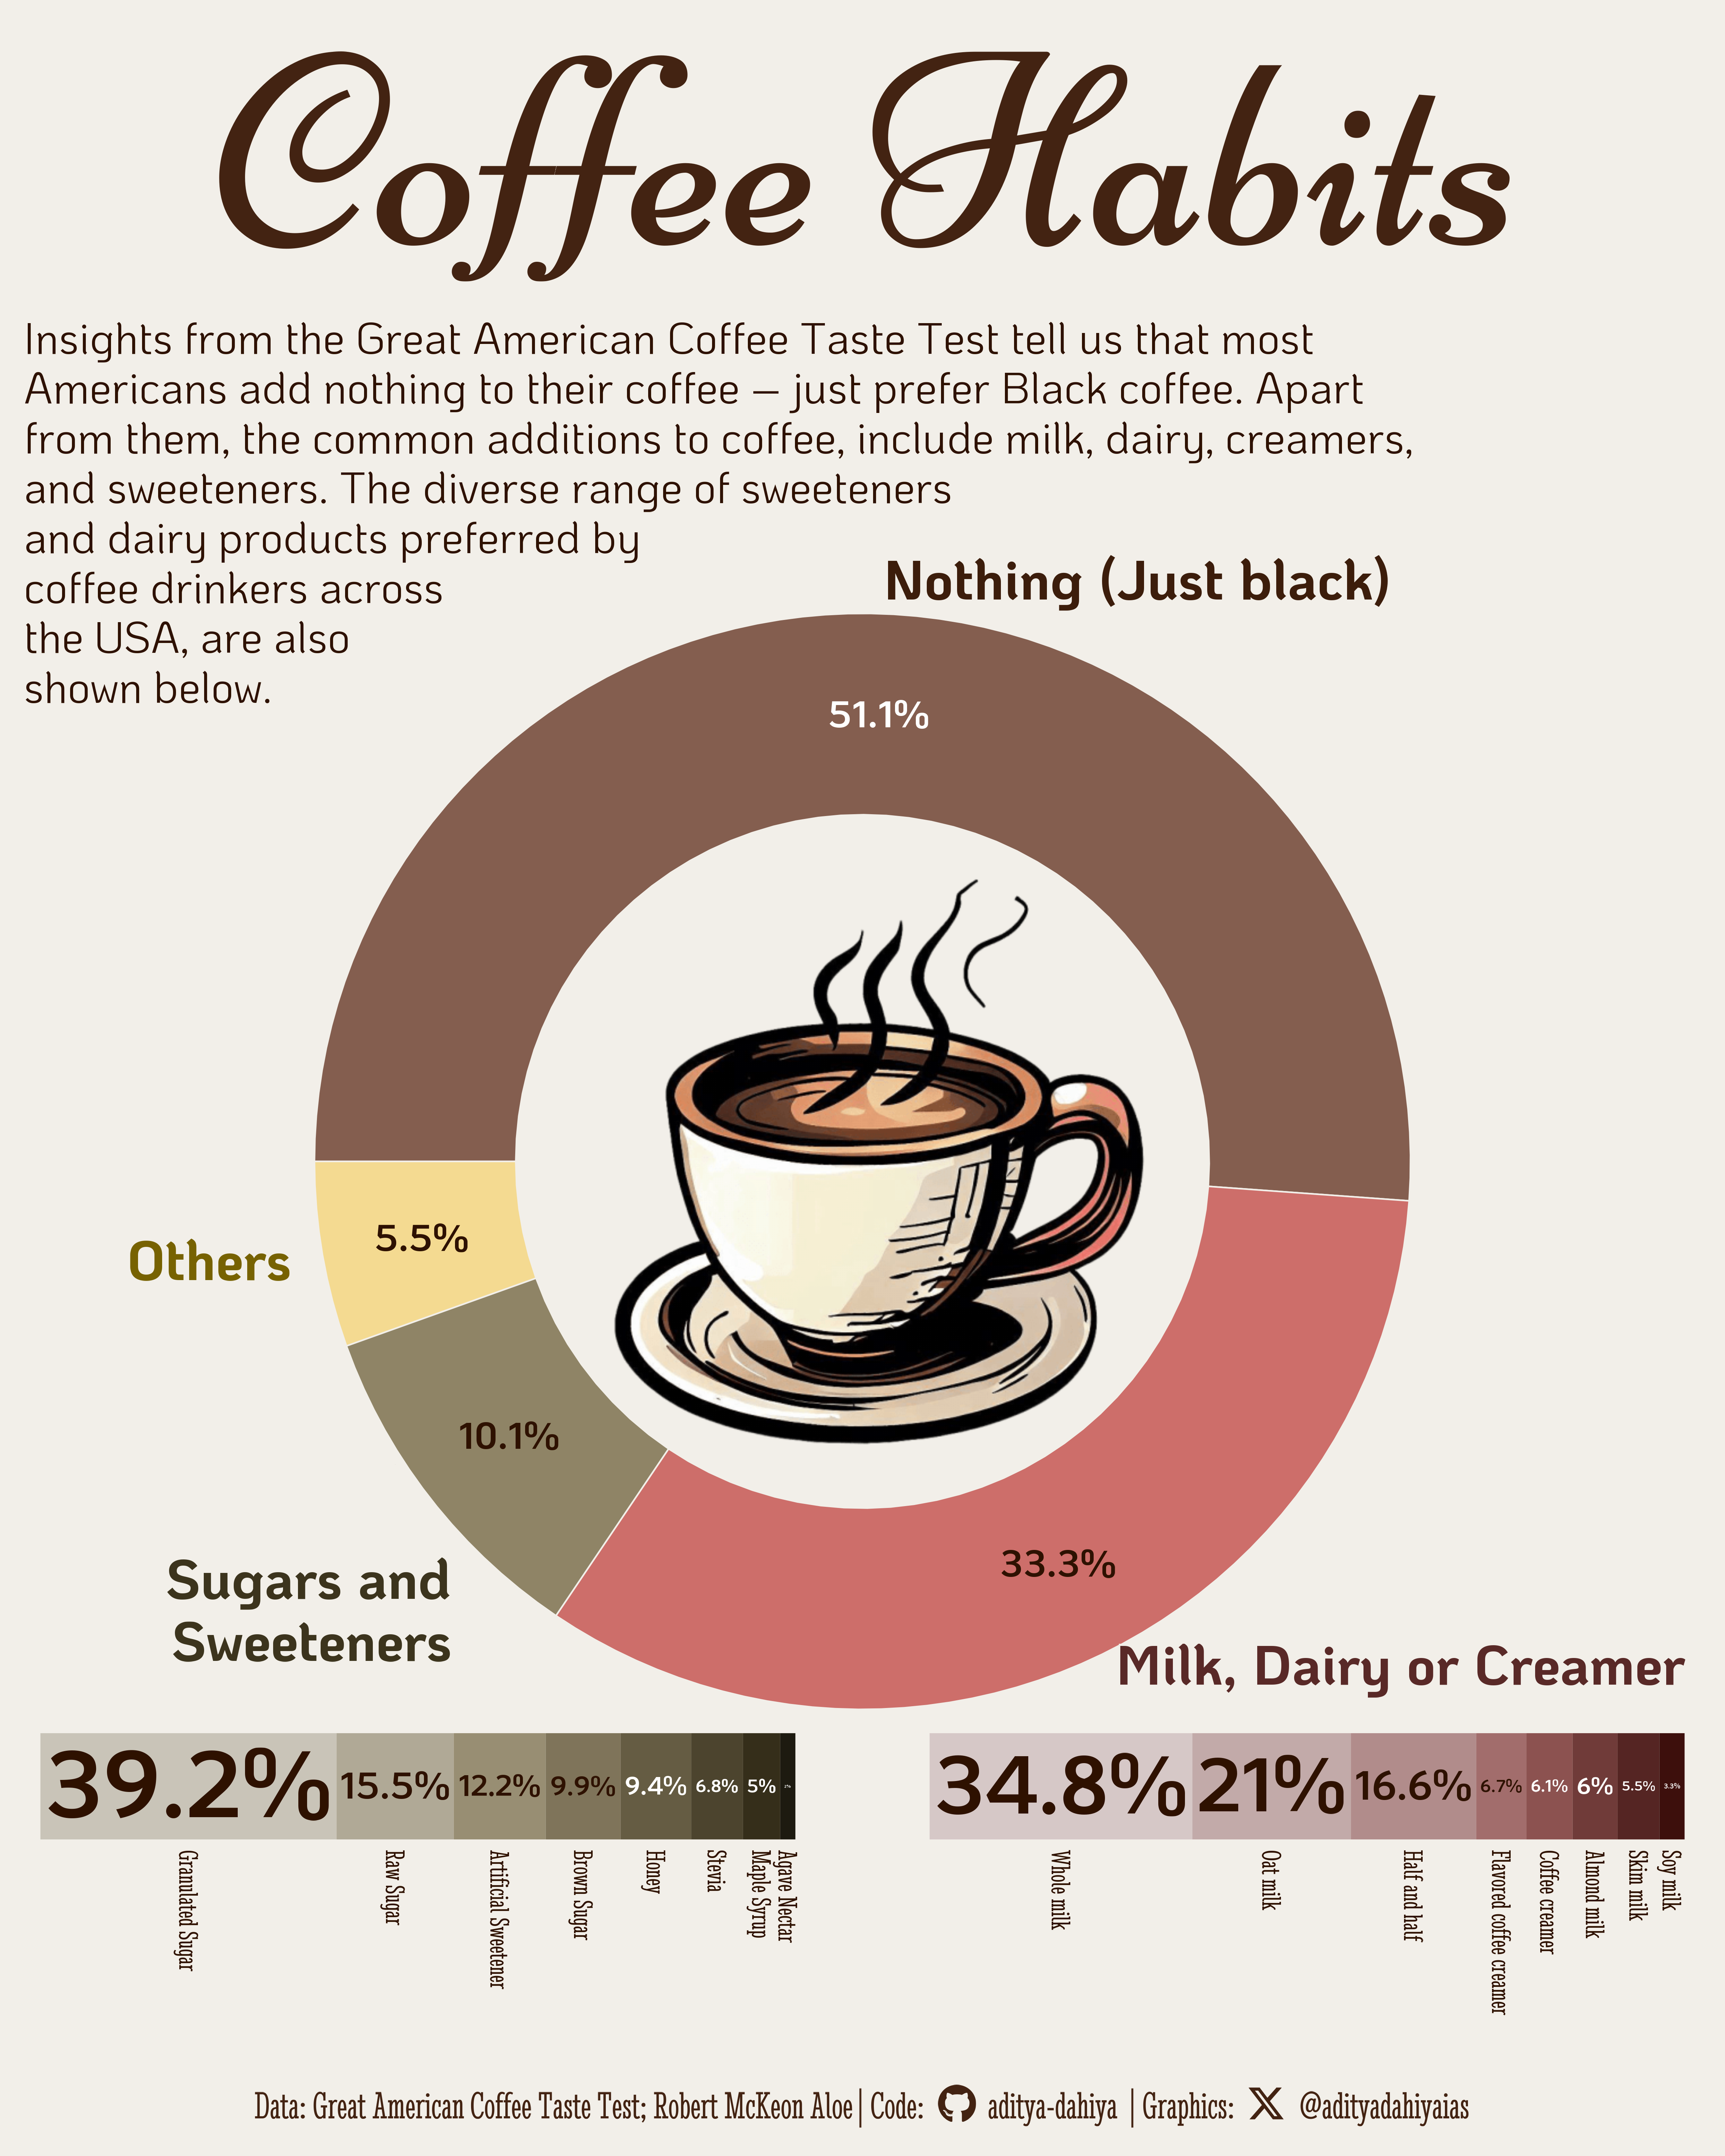 Insights from the Great American Coffee Taste Test tell is that most Americans add nothing to their coffee – just prefer Black coffee. Apart from them, the common additions to coffee, include milk, dairy, creamers, and sweeteners. The diverse range of sweeteners and dairy products preferred by coffee drinkers across the USA, are also shown.